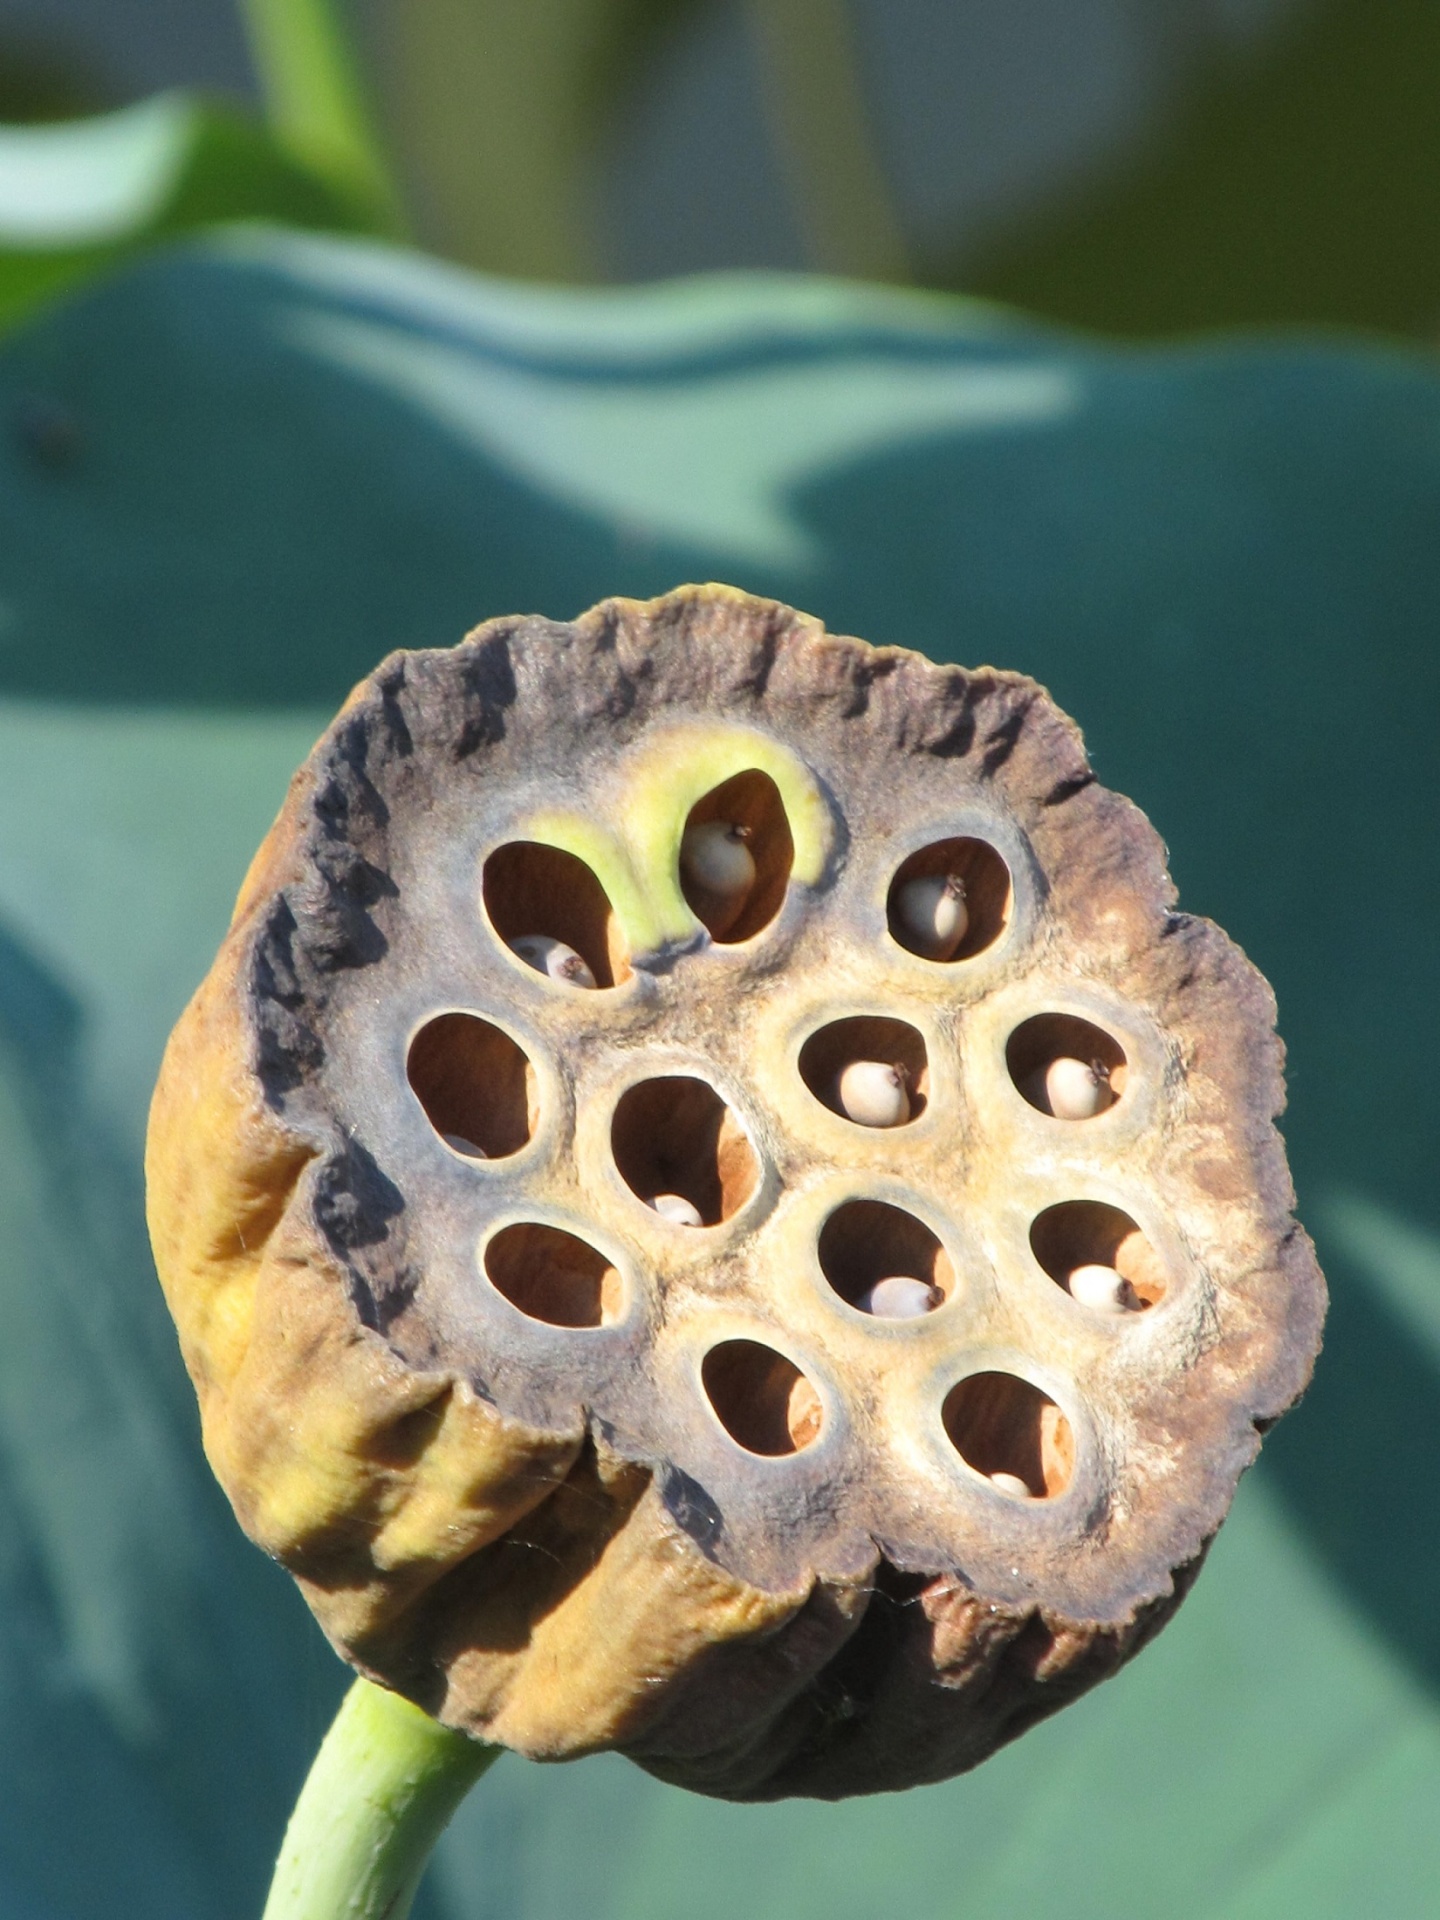 seed-pod-free-stock-photo-public-domain-pictures